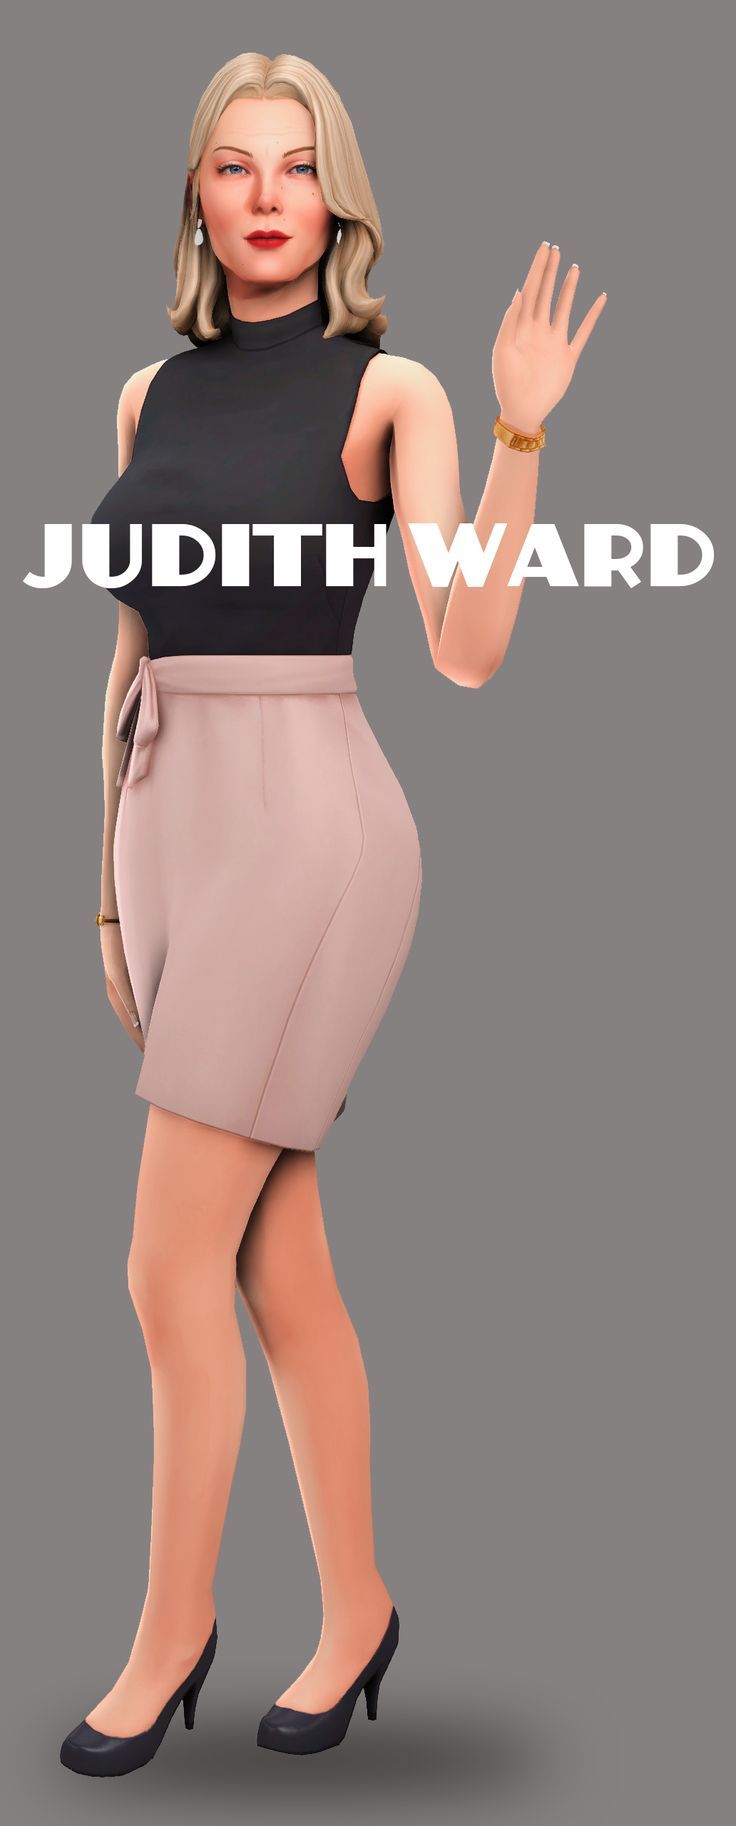 angela peek recommends judith ward sims 4 pic